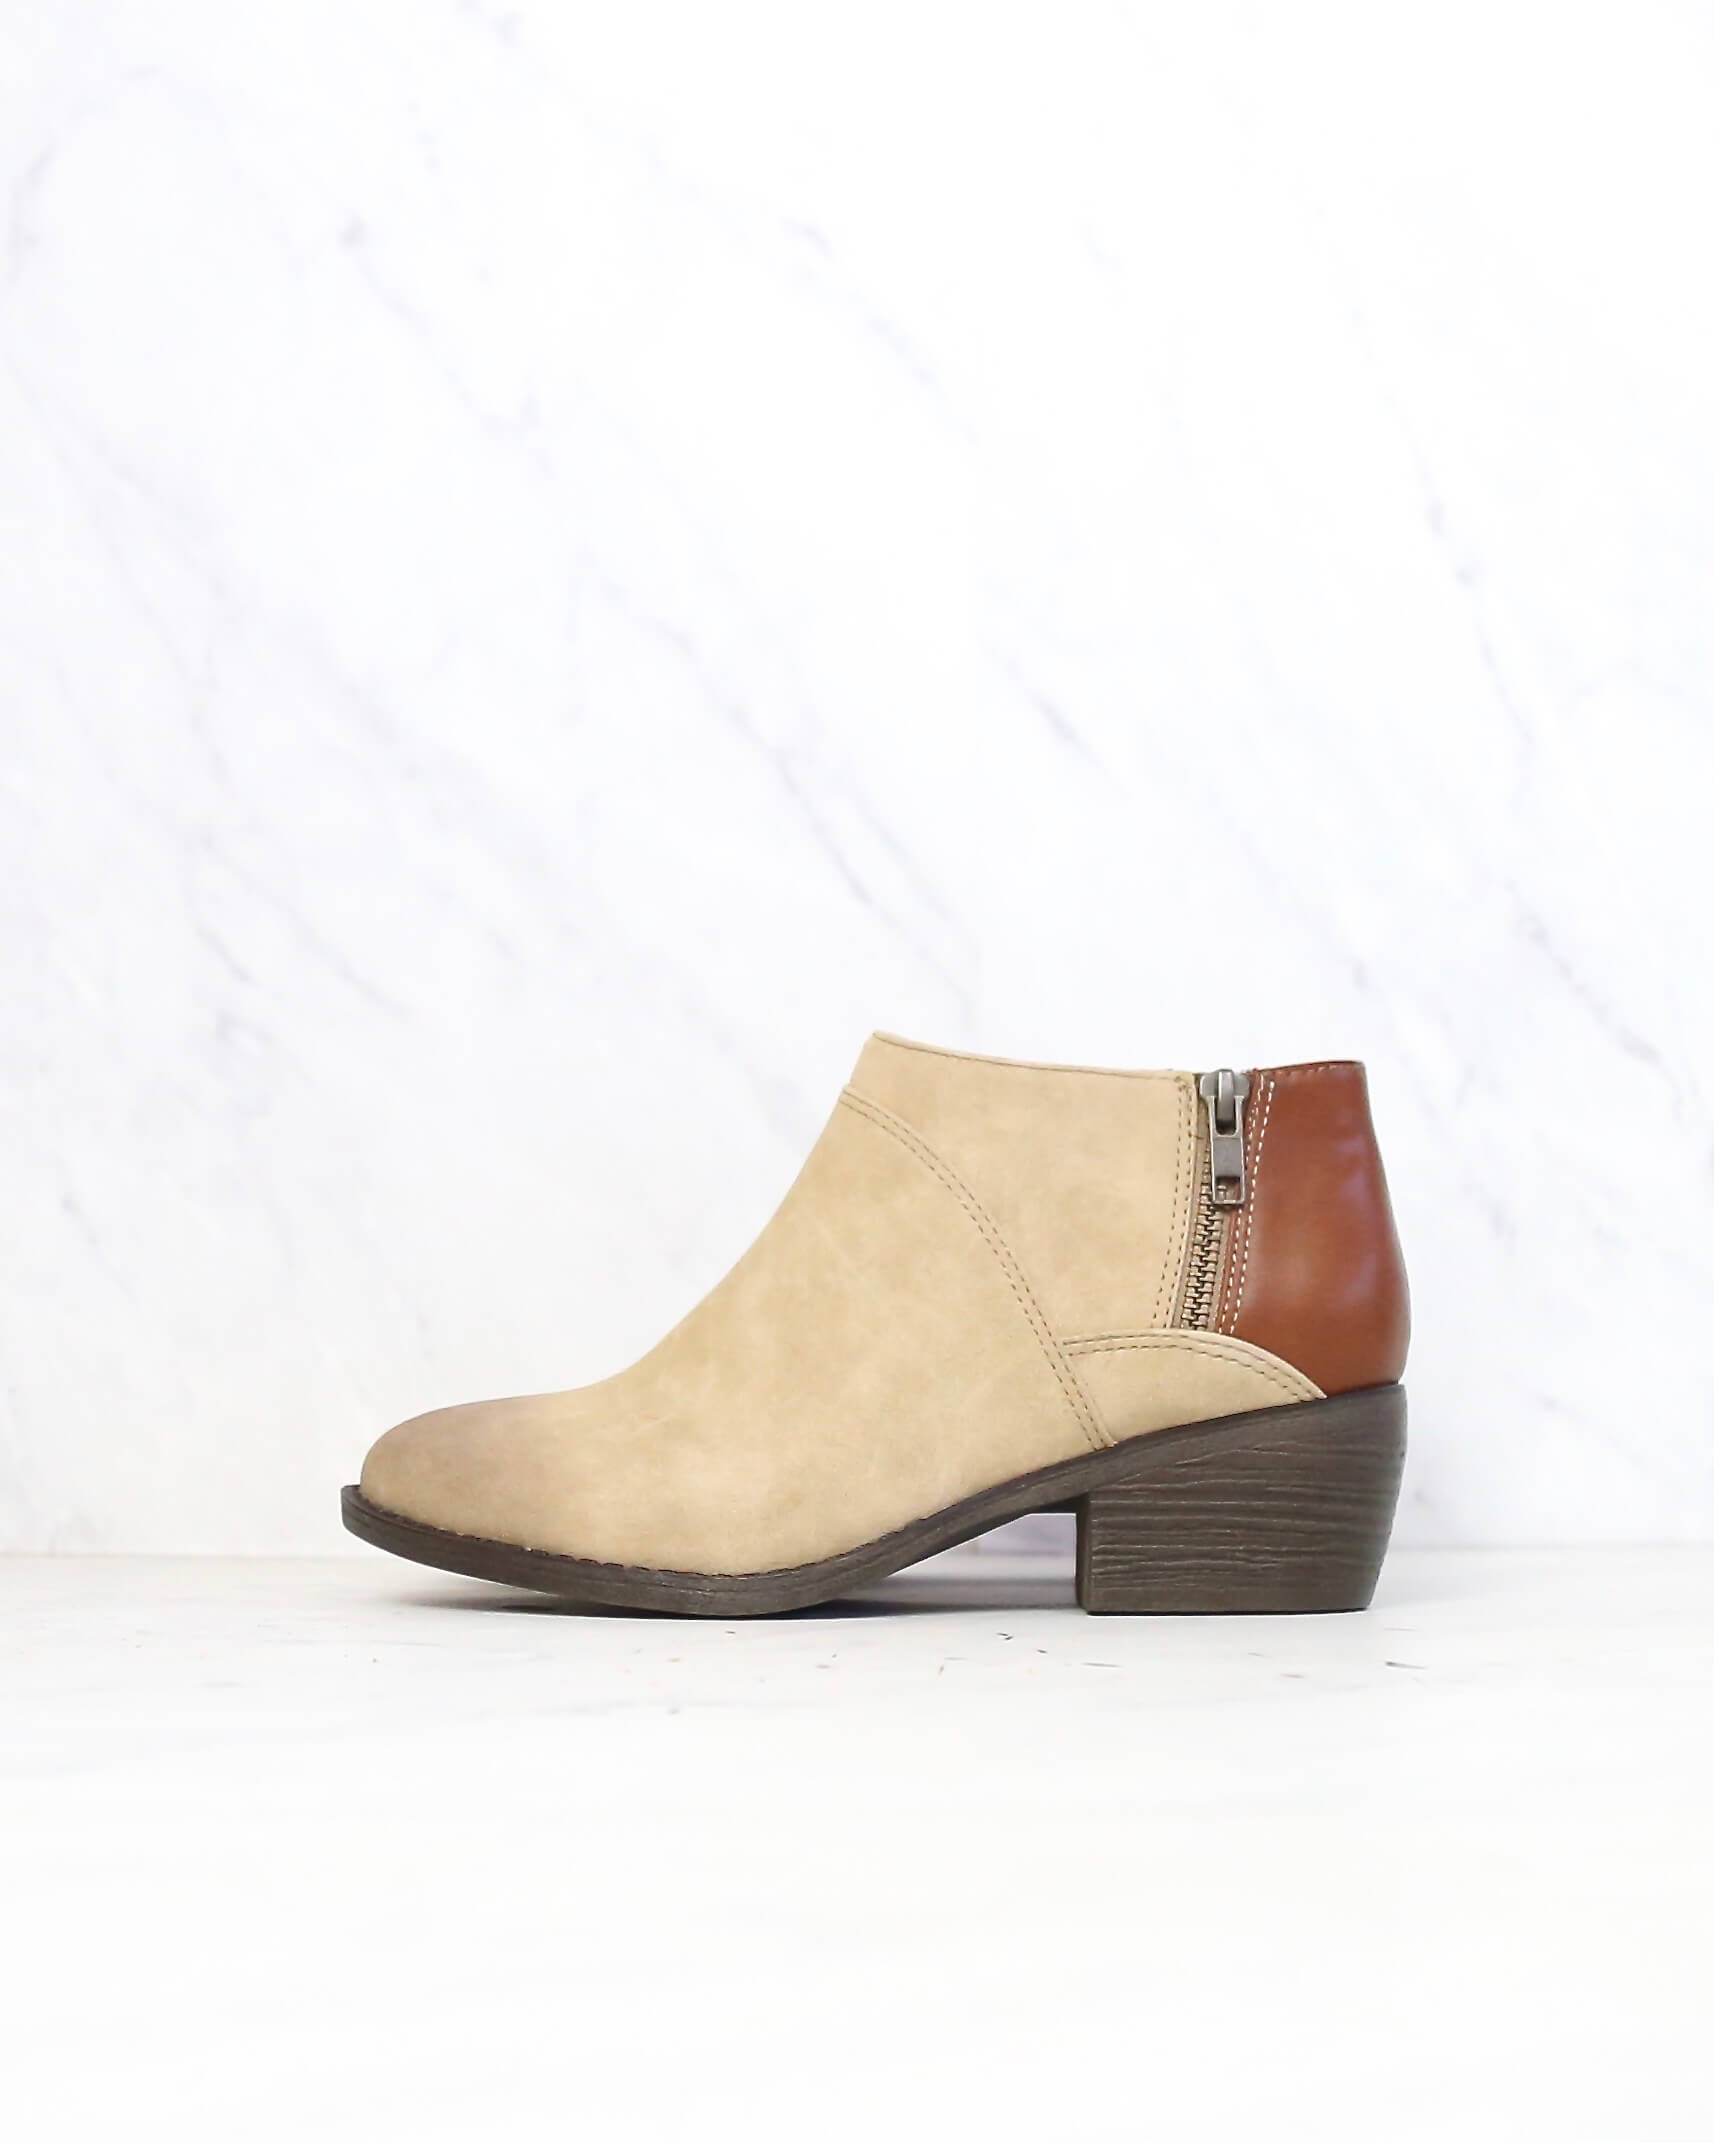 bc footwear union in whiskey + taupe womens ankle boot